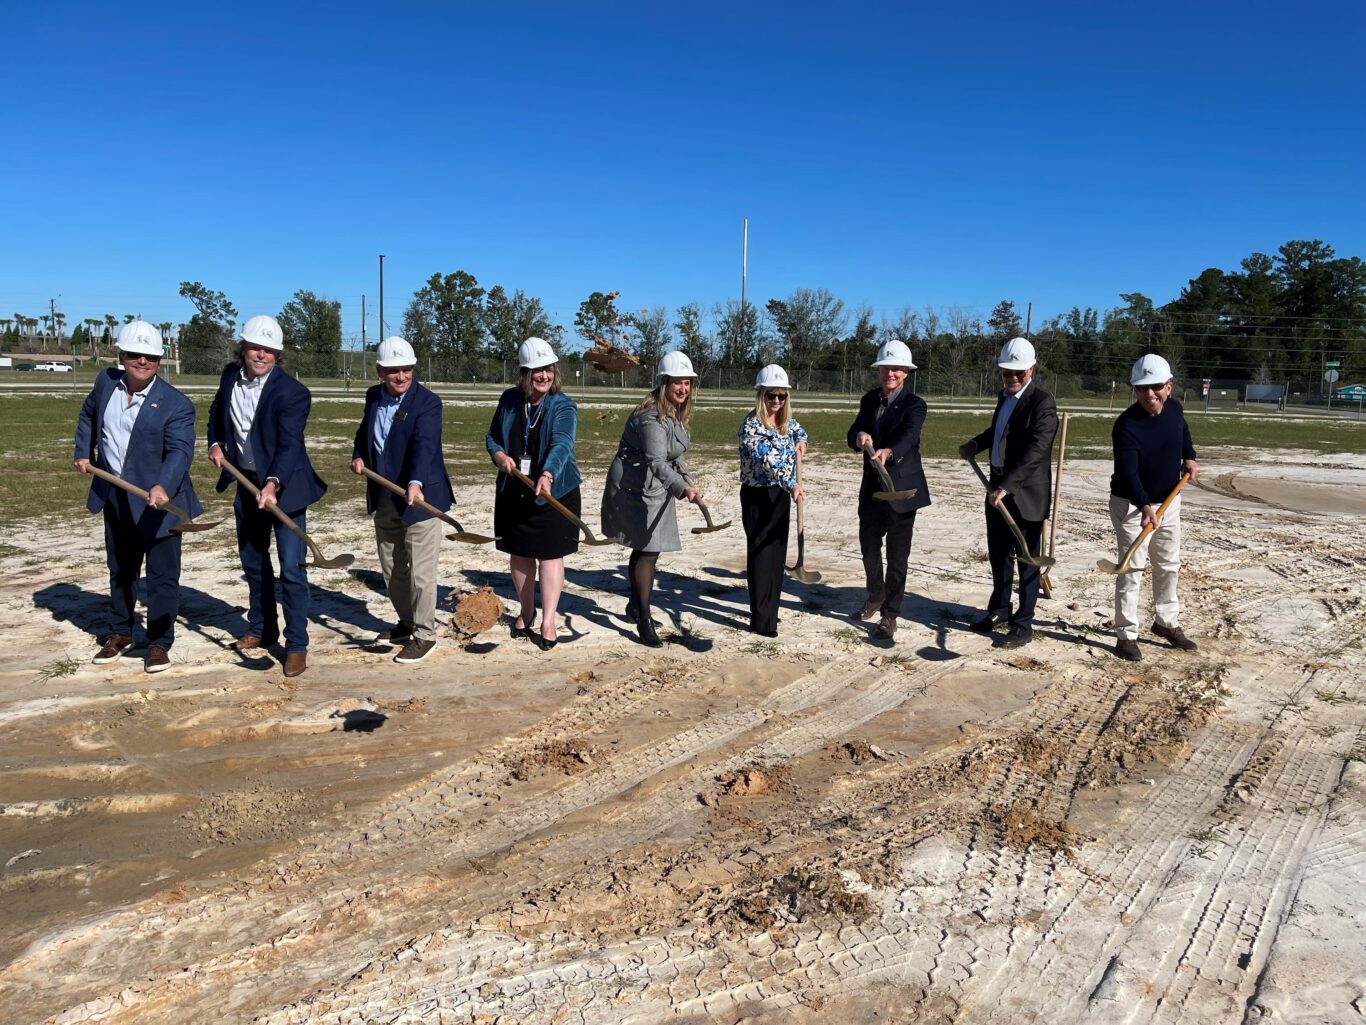 TownePlace Suites by Marriot groundbreaking